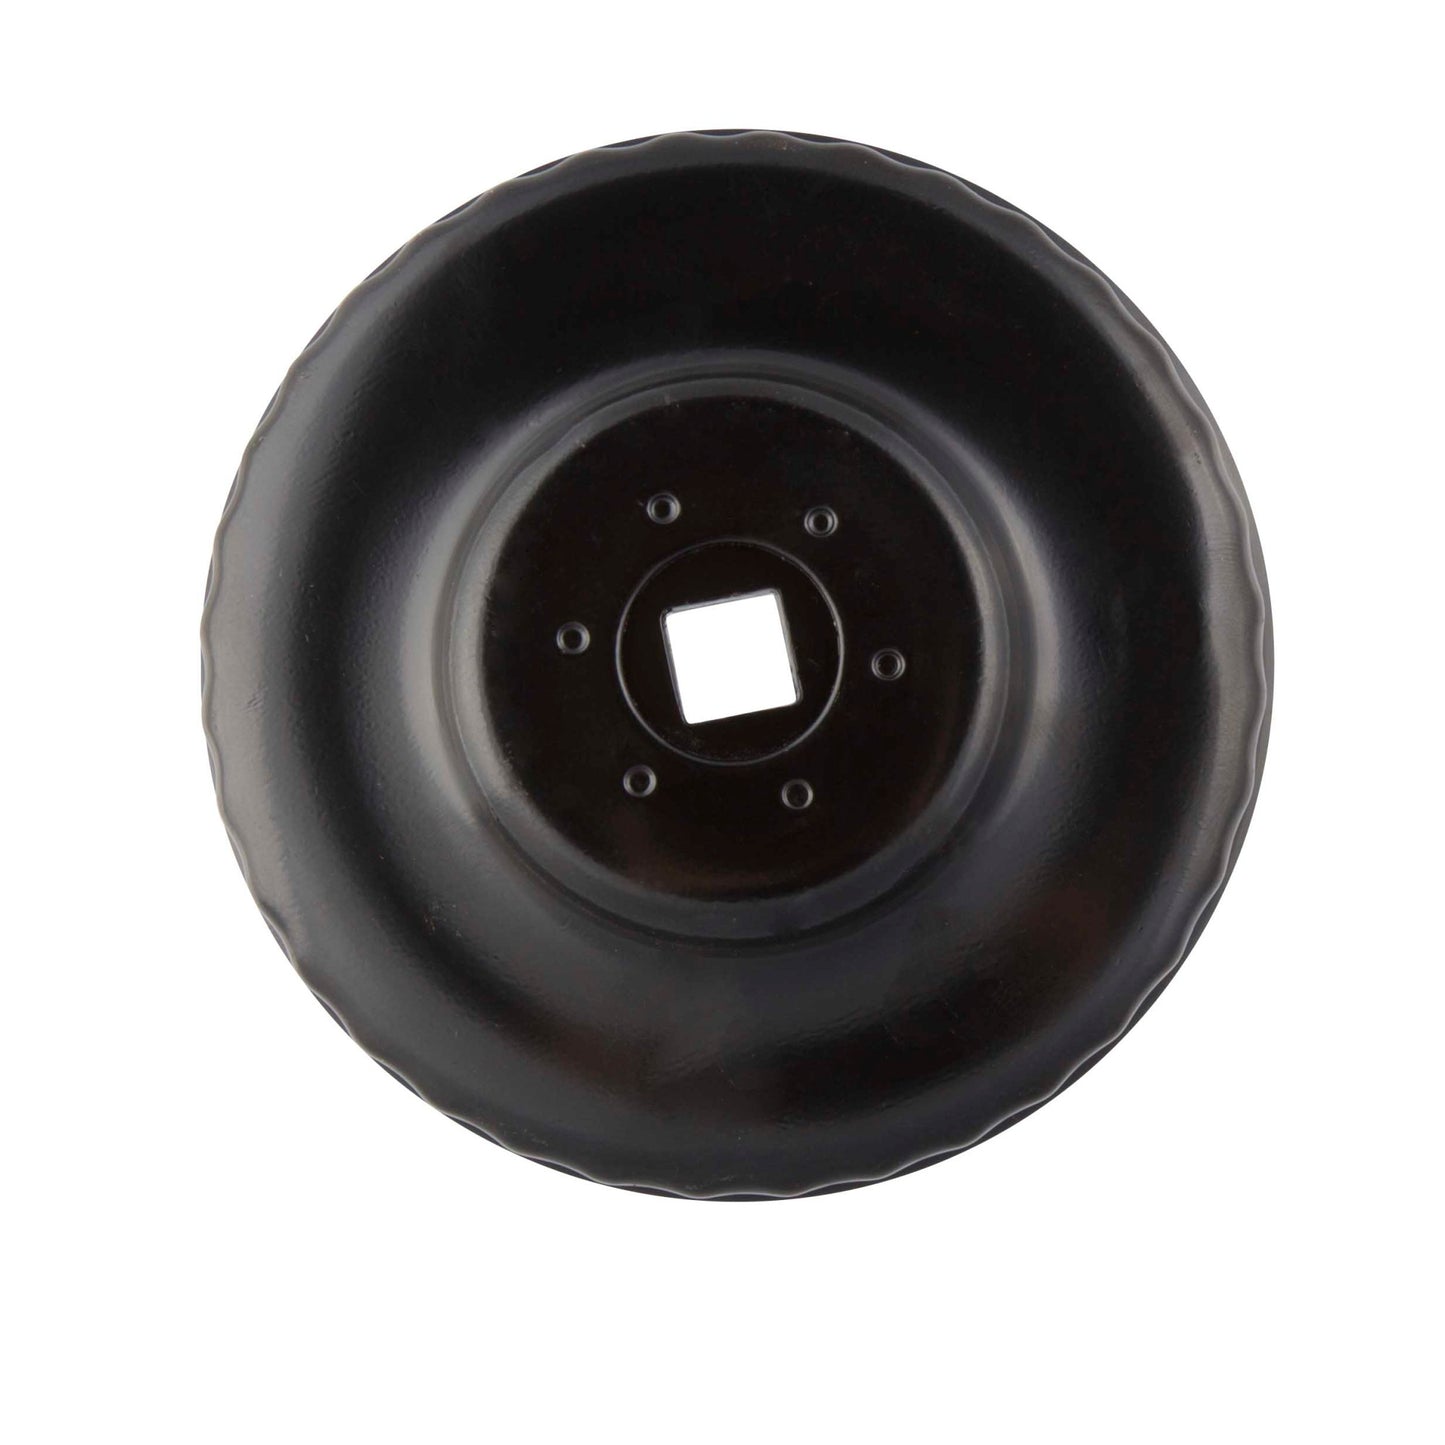 Oil Filter Cap Wrench 93mm x 36 Flute